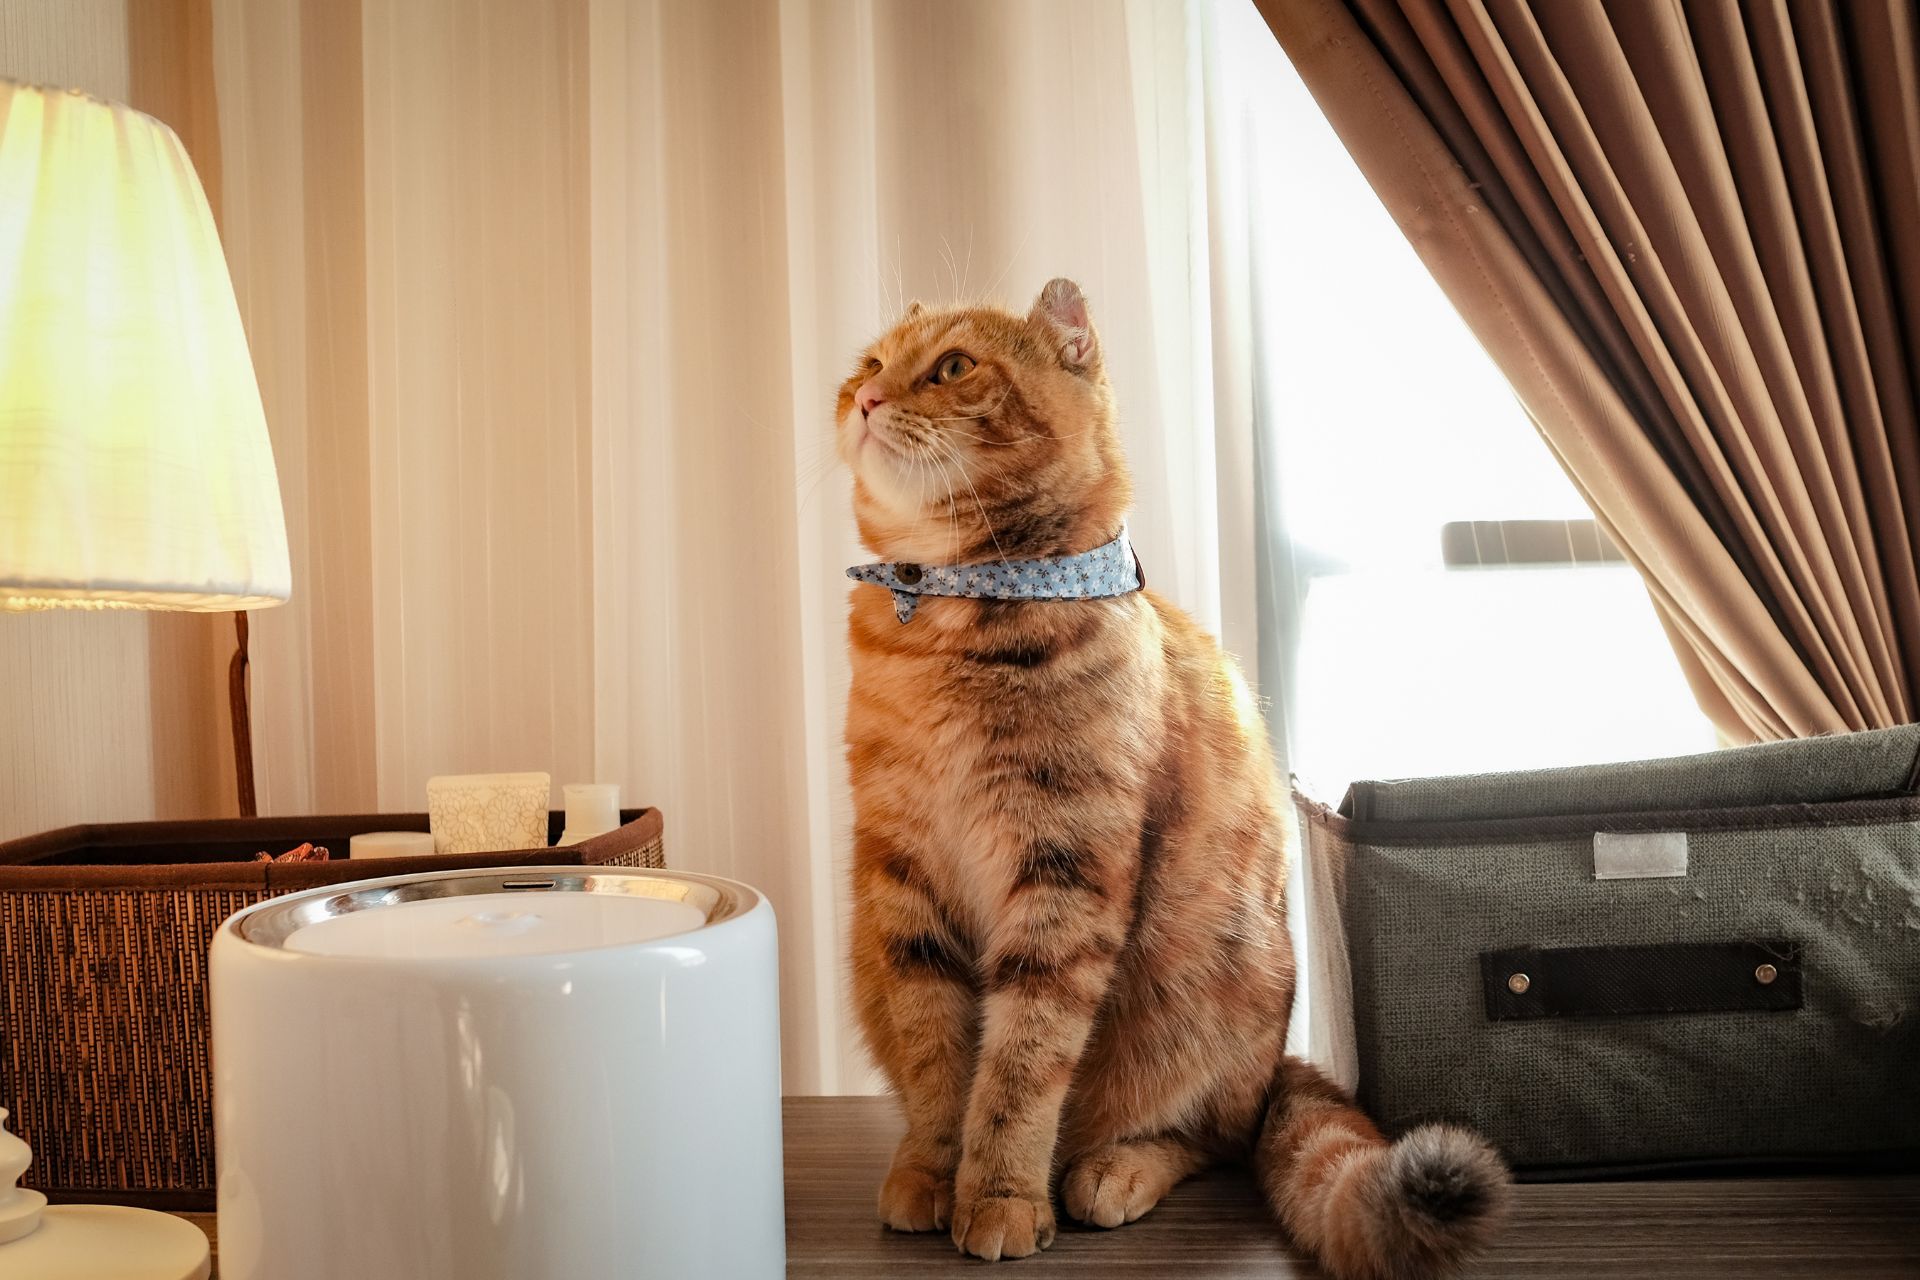 cat with collar on its neck sitting on a table